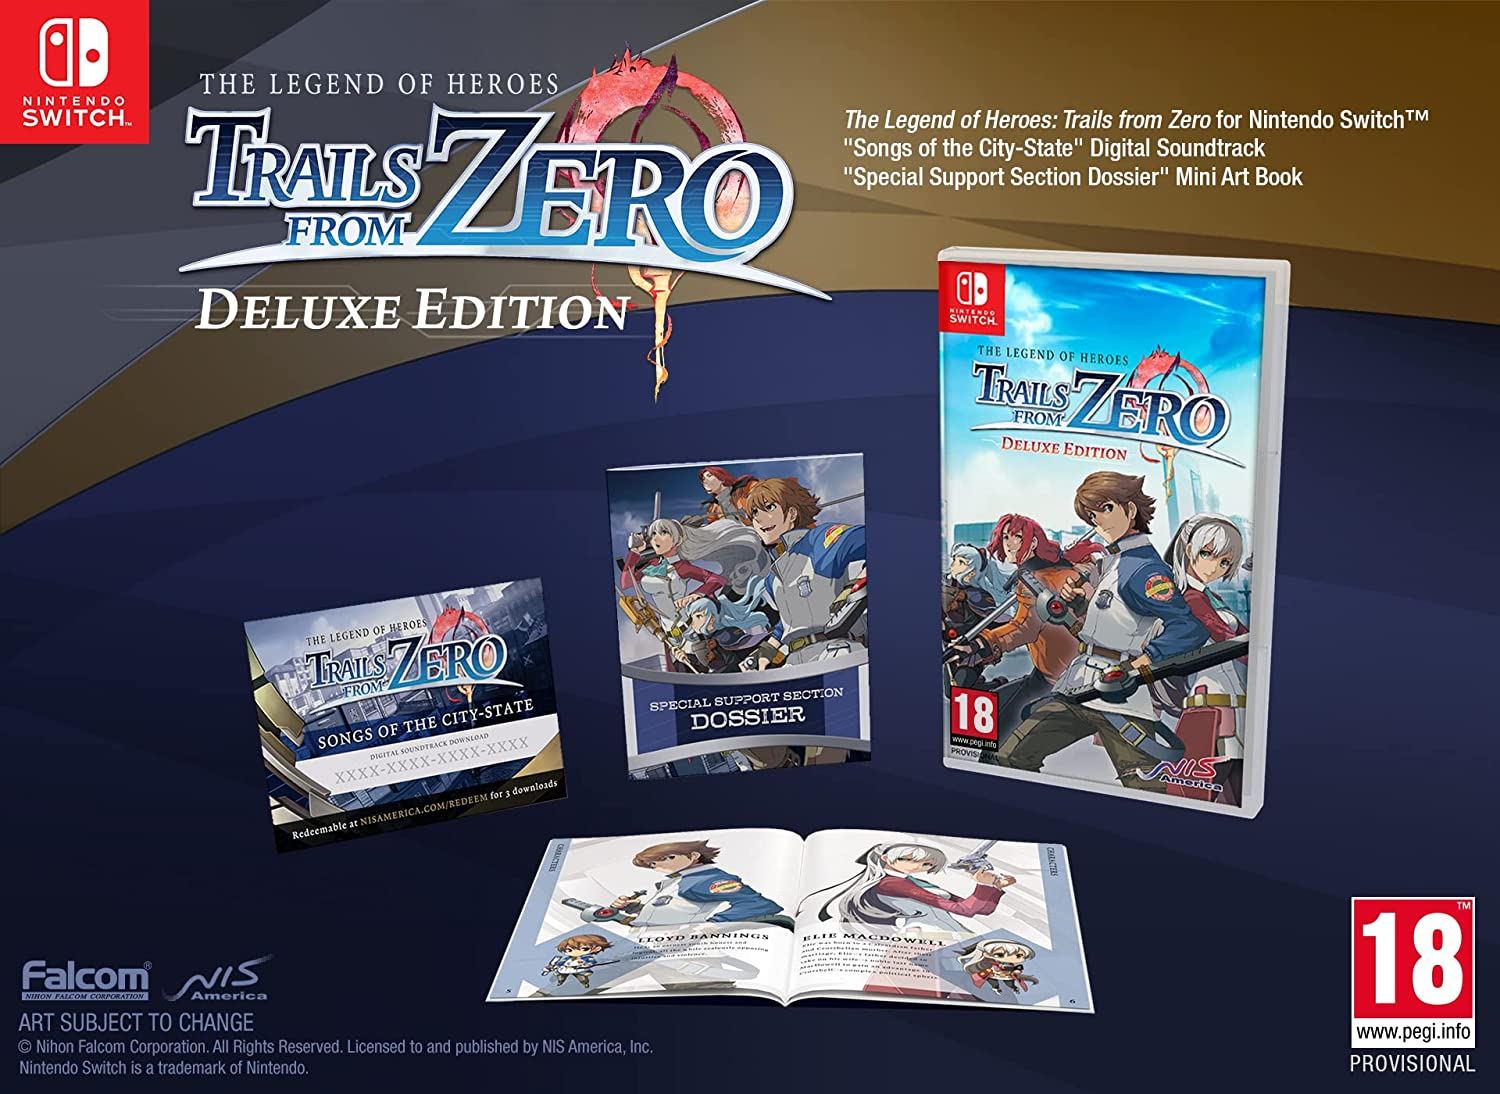 The Legend of Heroes: Trails from Zero [Deluxe Edition] Nintendo Switch